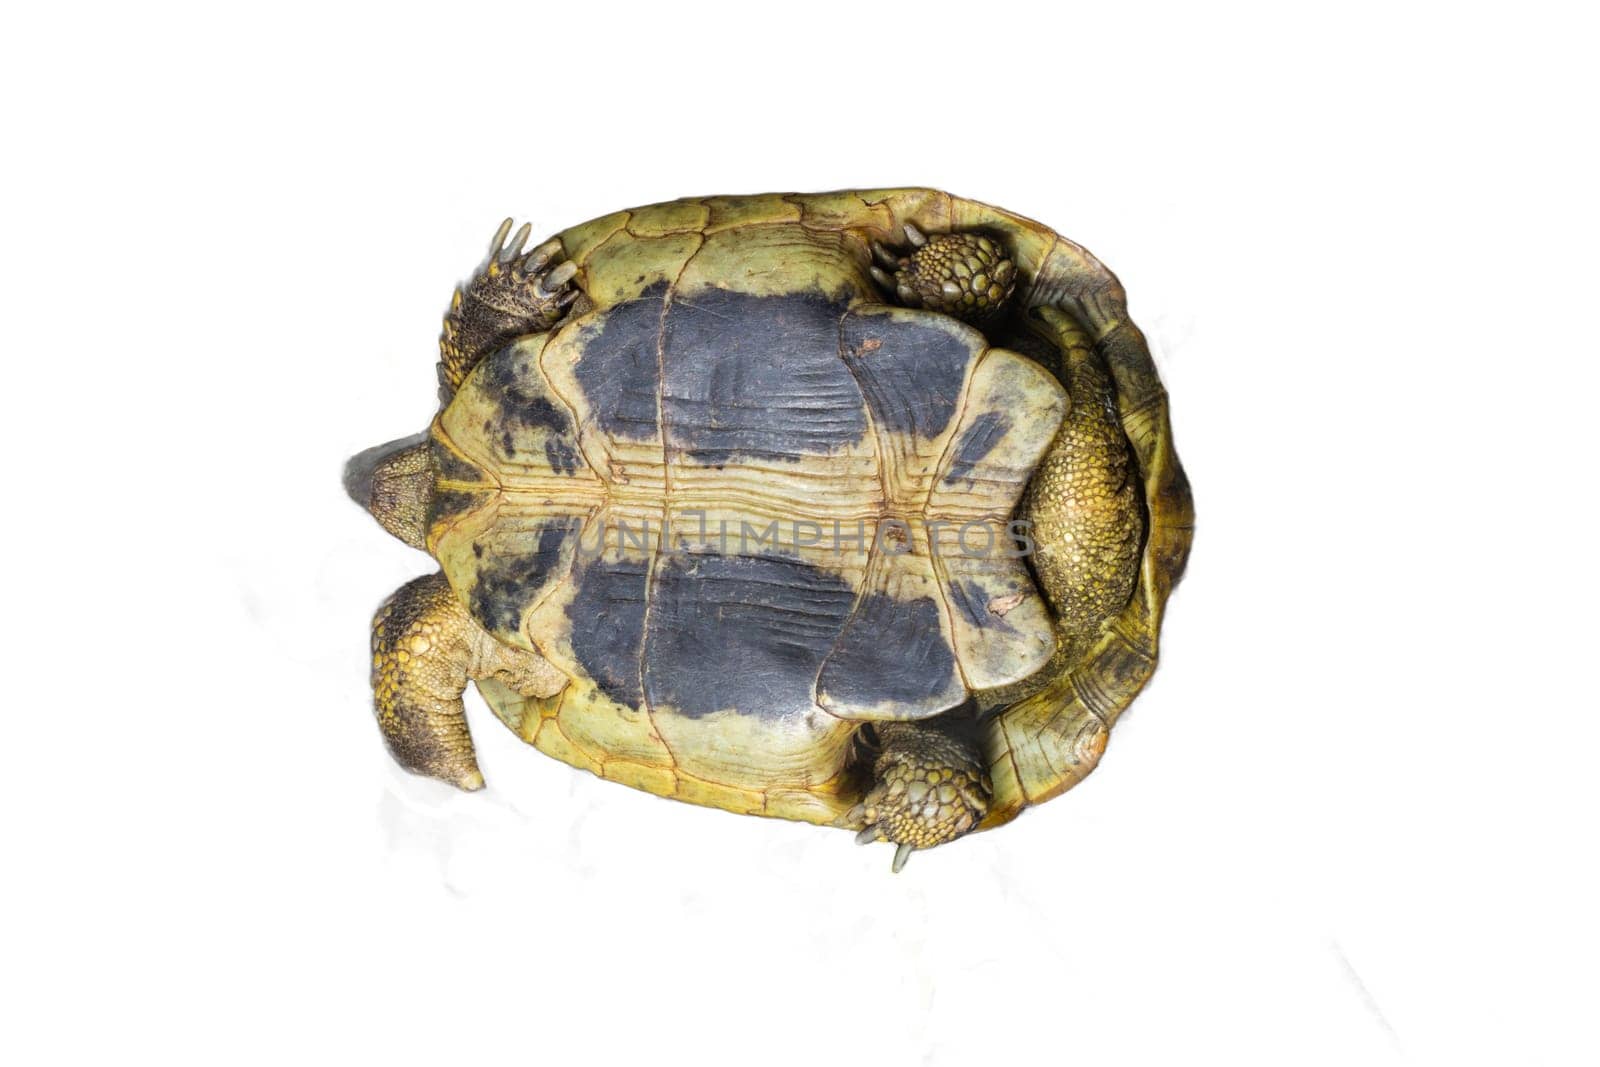 The underside of a tortoise isolated on a transparent background. Ideal for educational illustrations, zoology projects, and wildlife designs.